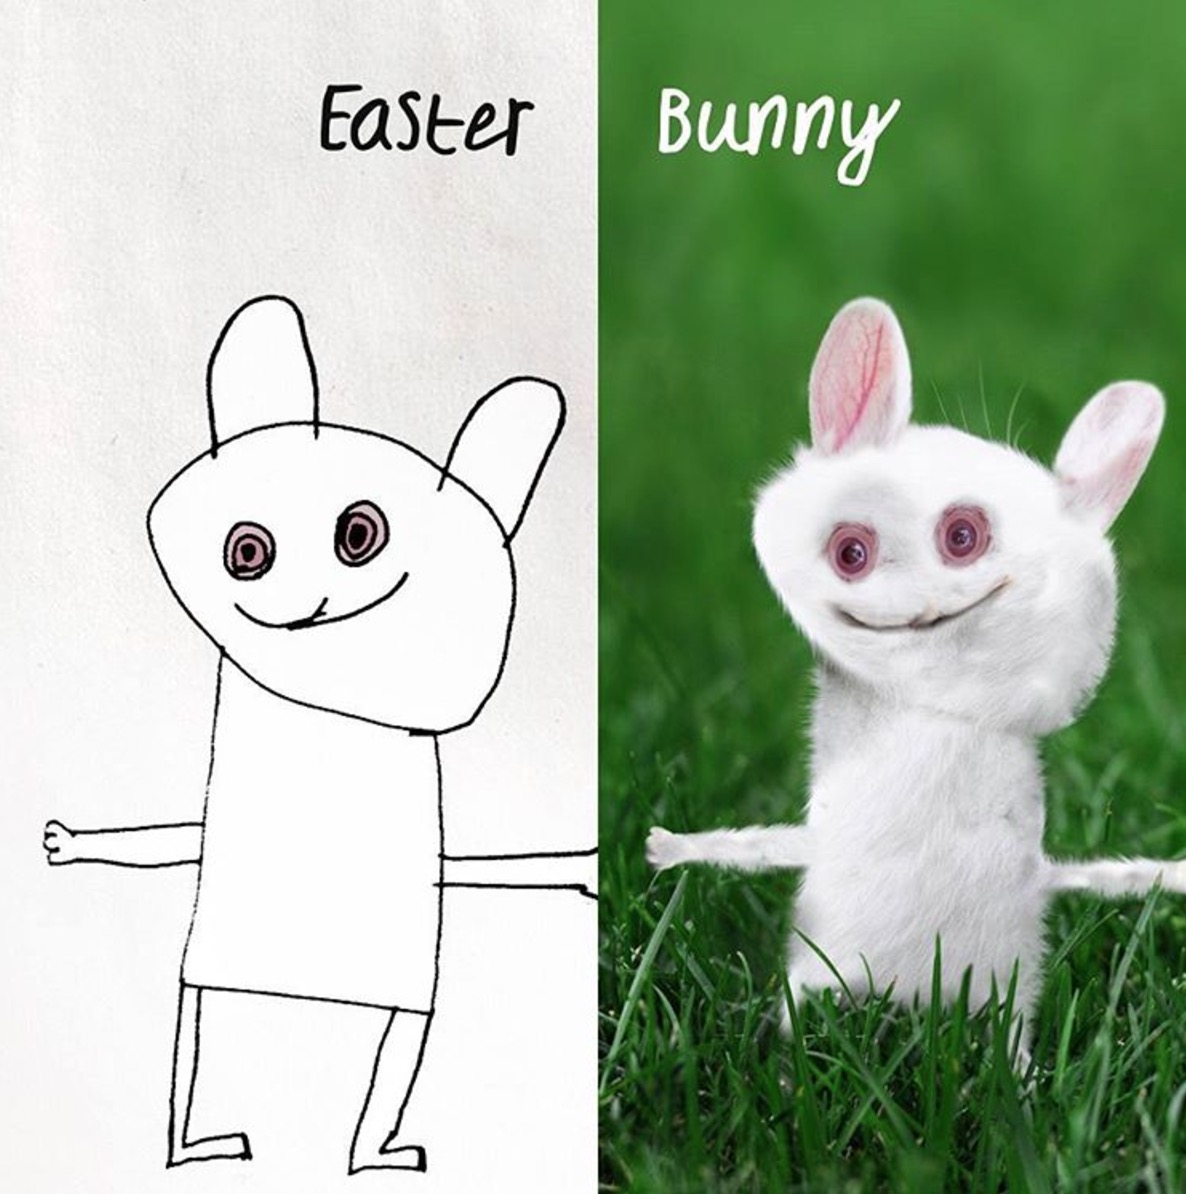 Happy Easter from Things I Have Drawn
(Here's a bunny I saw on the lawn)